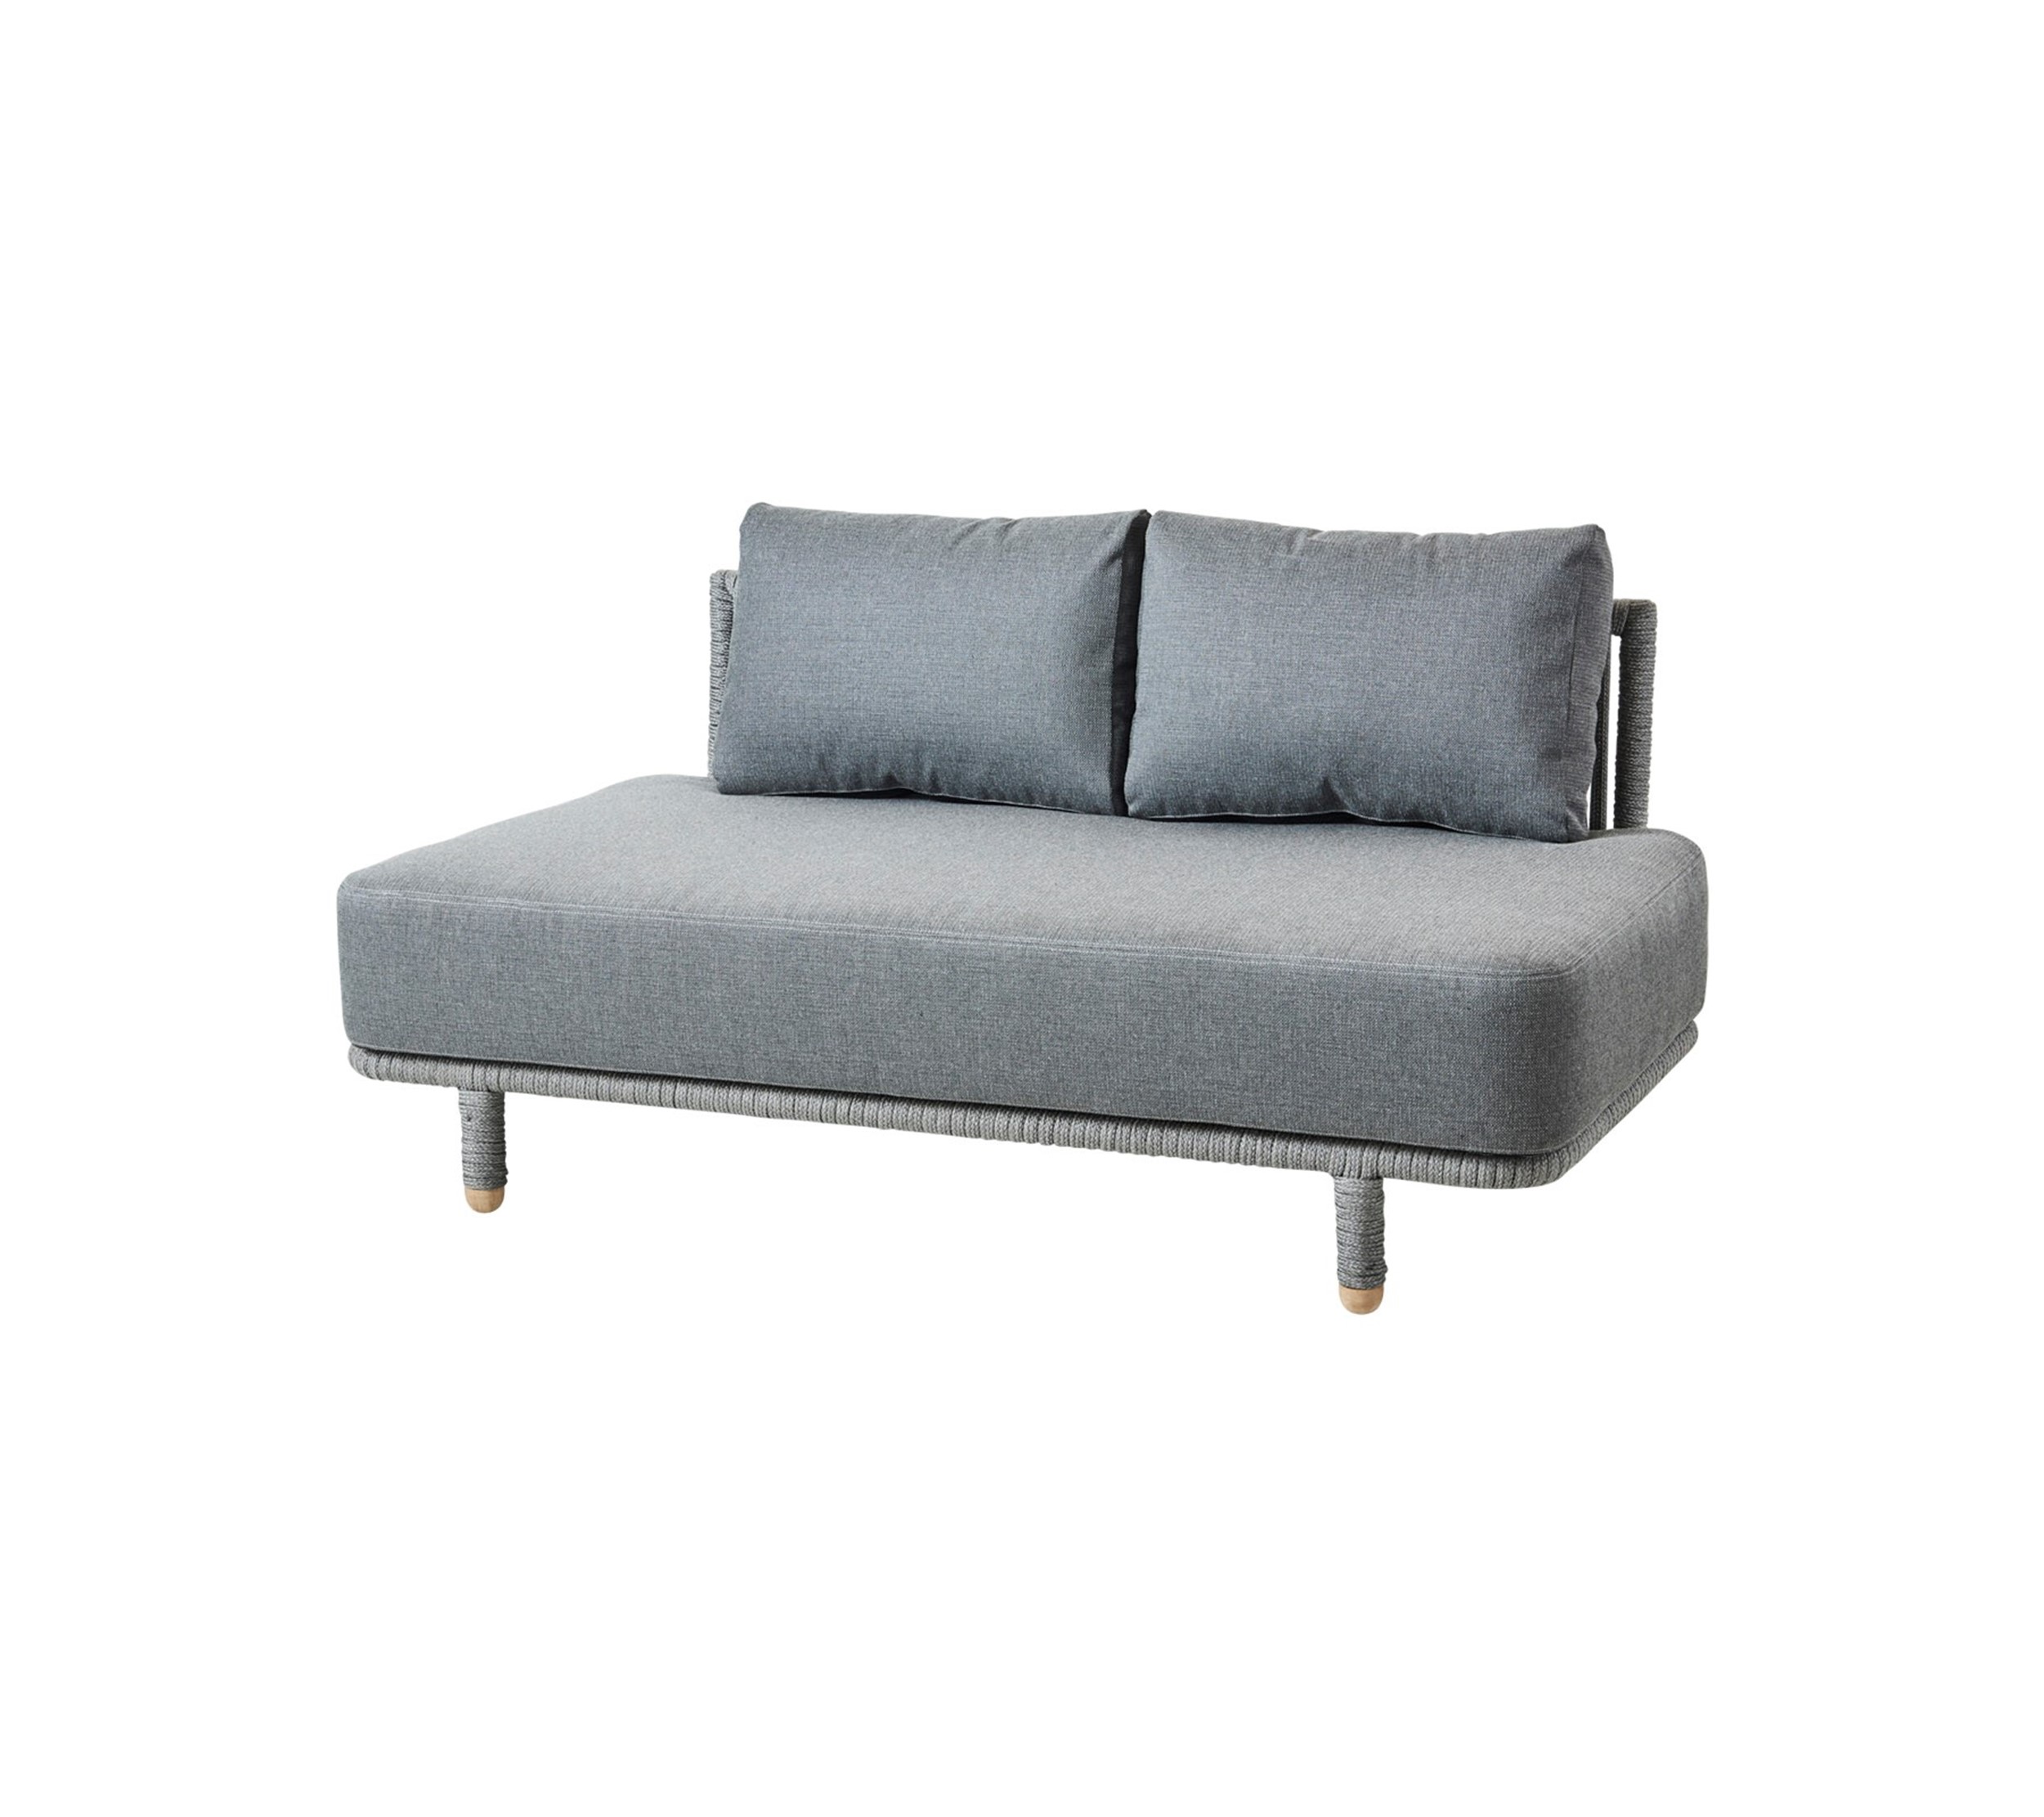 Picture of Moments 2-seater sofa module, incl. Grey cushion set